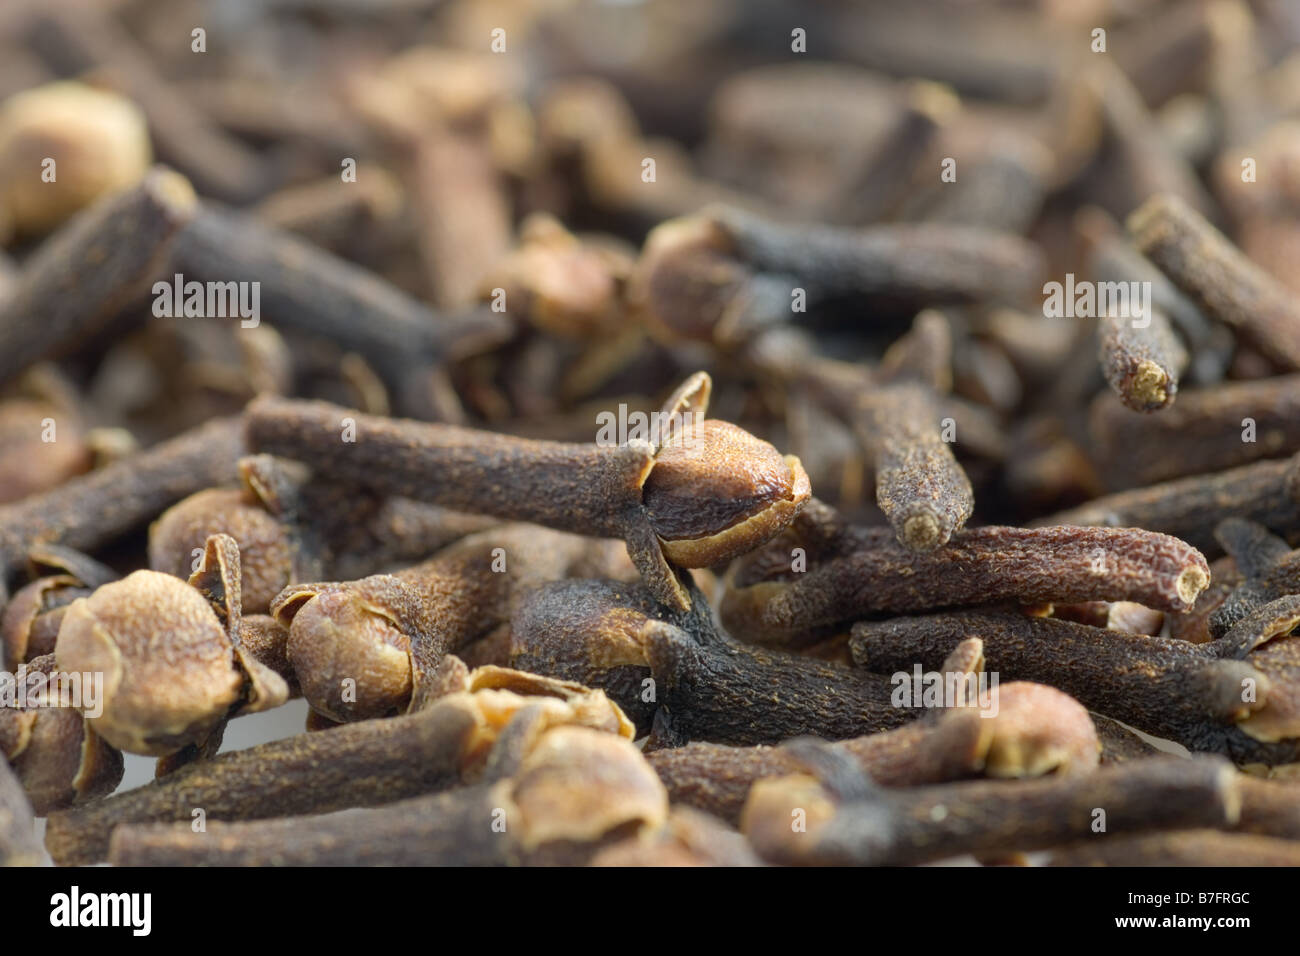 Cloves spices Stock Photo